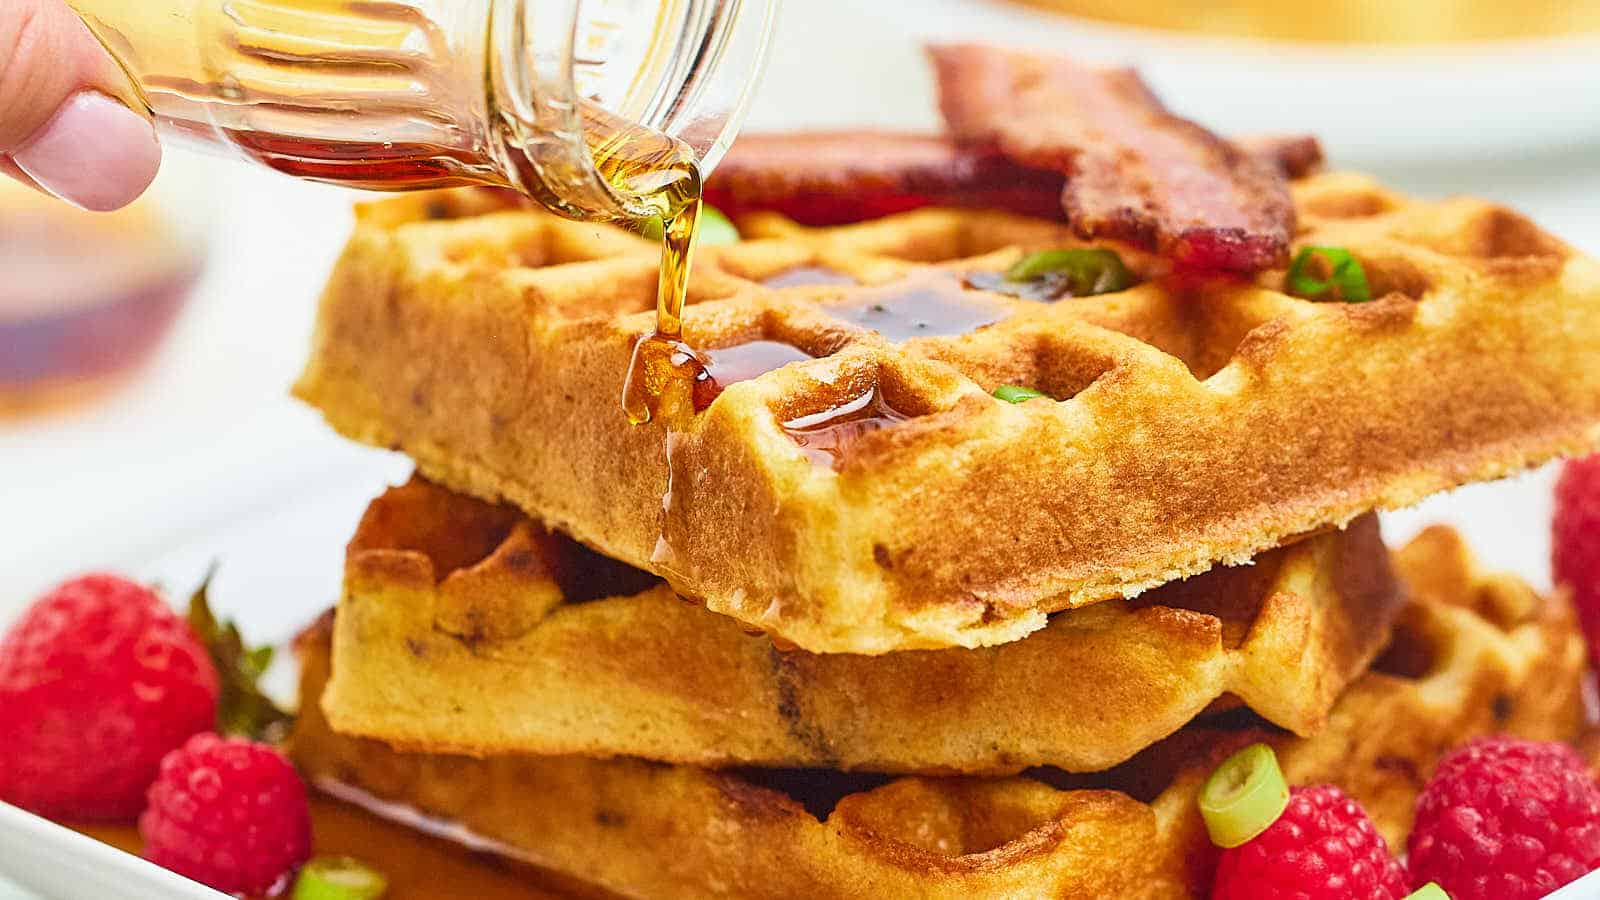 A person is pouring syrup on a stack of waffles.